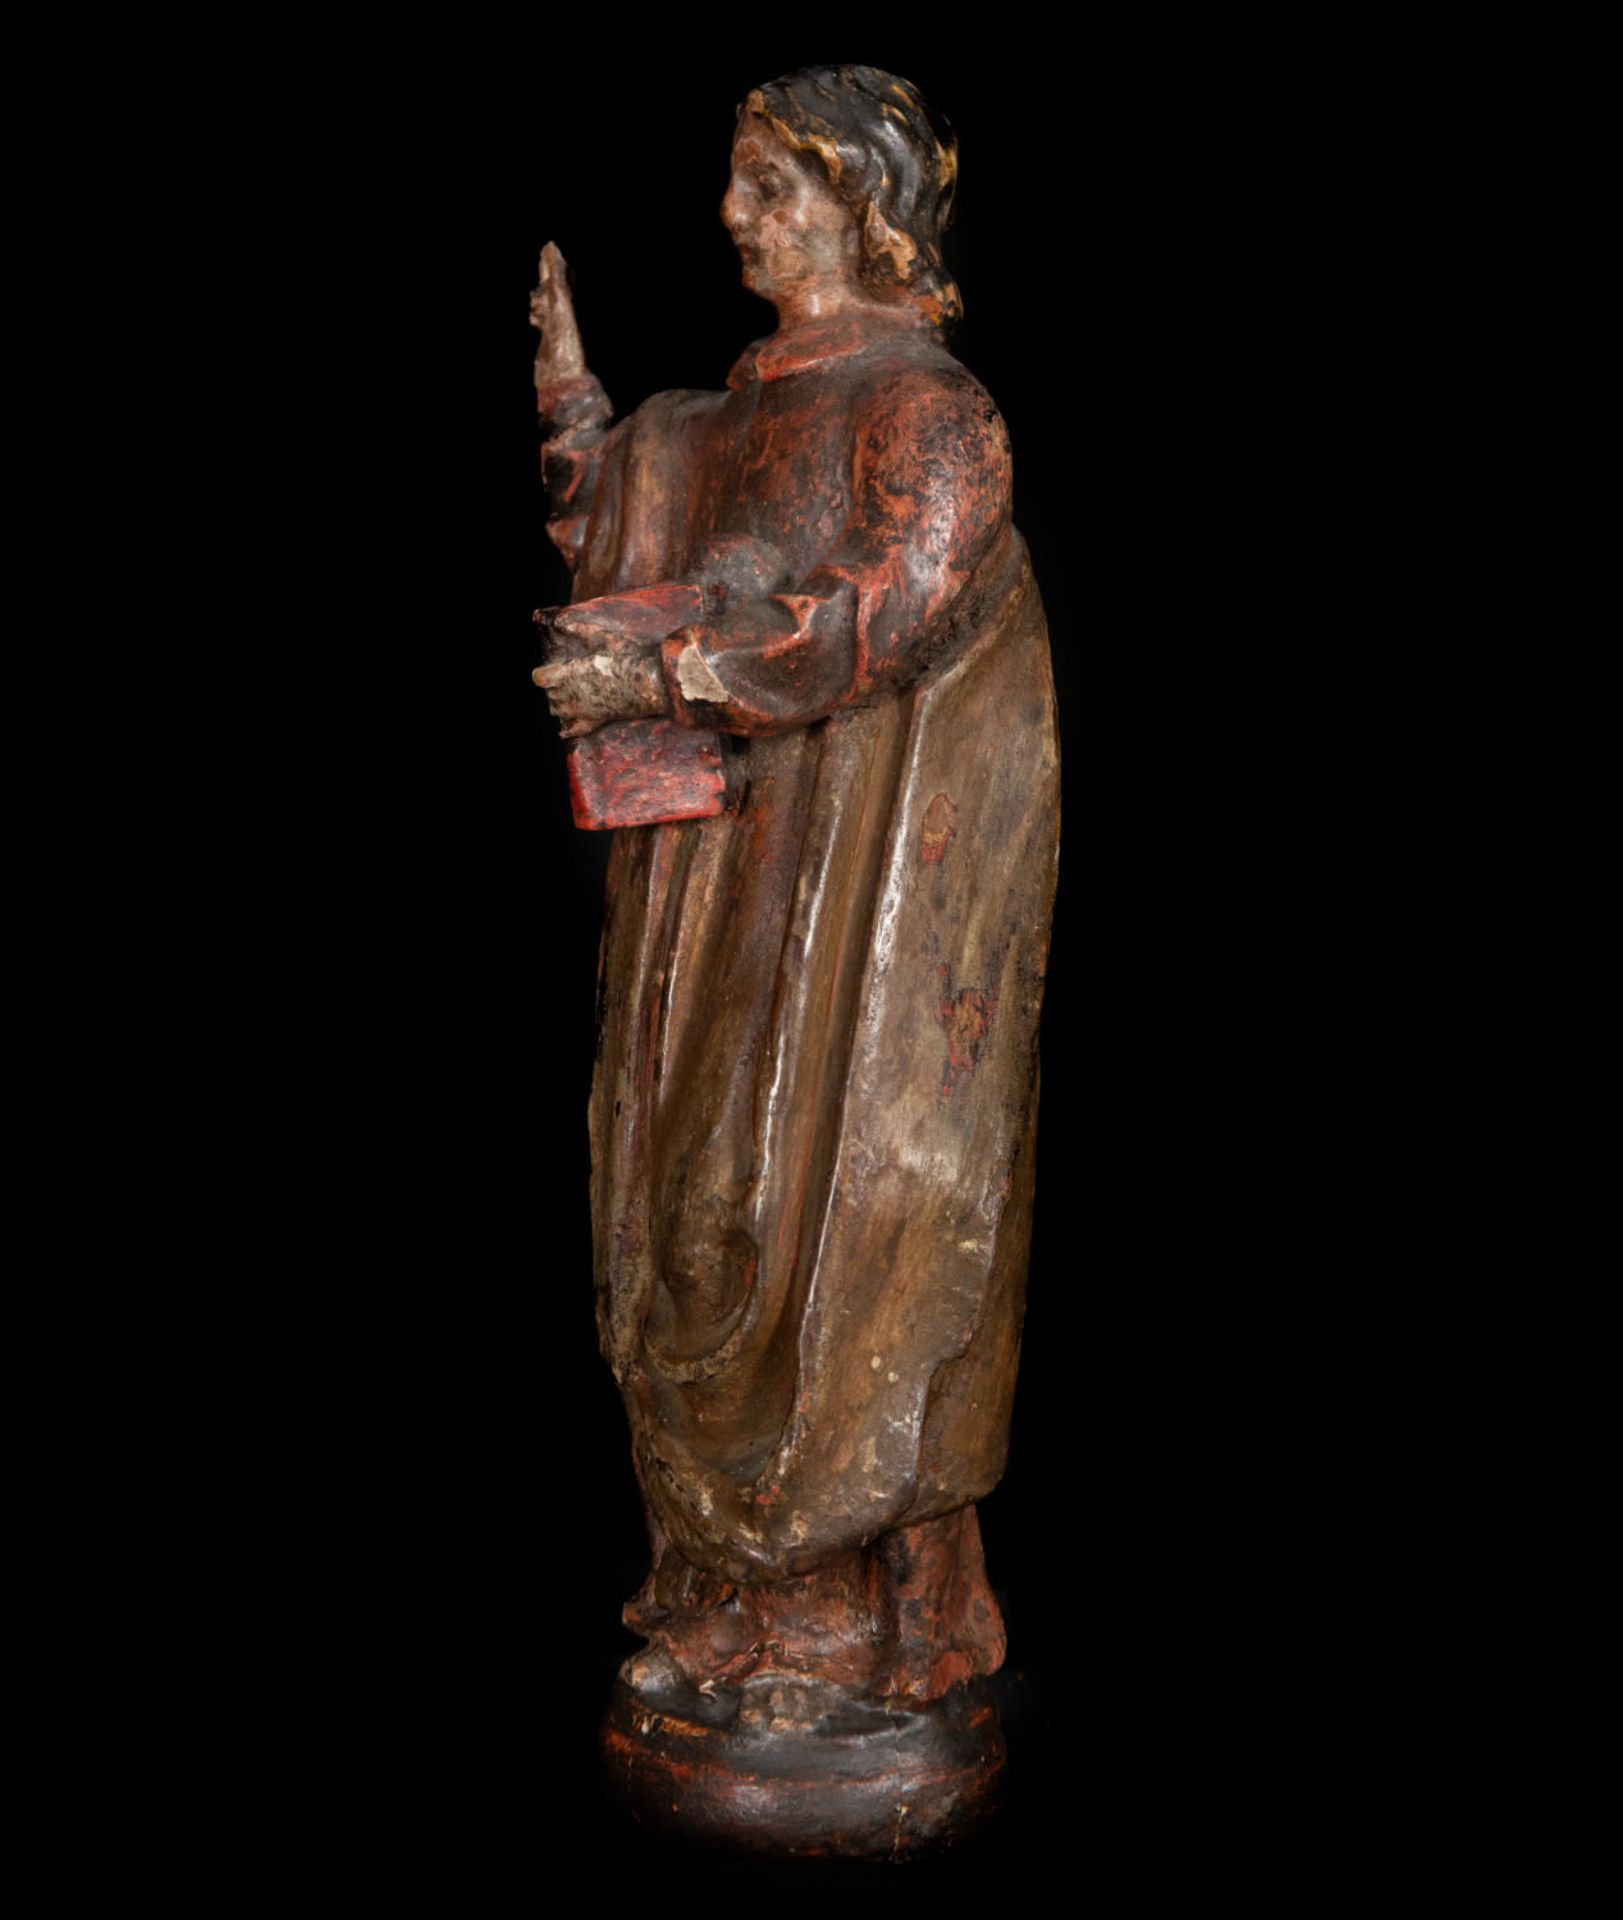 Wooden carving of Saint John the Evangelist, 17th century - Image 3 of 5